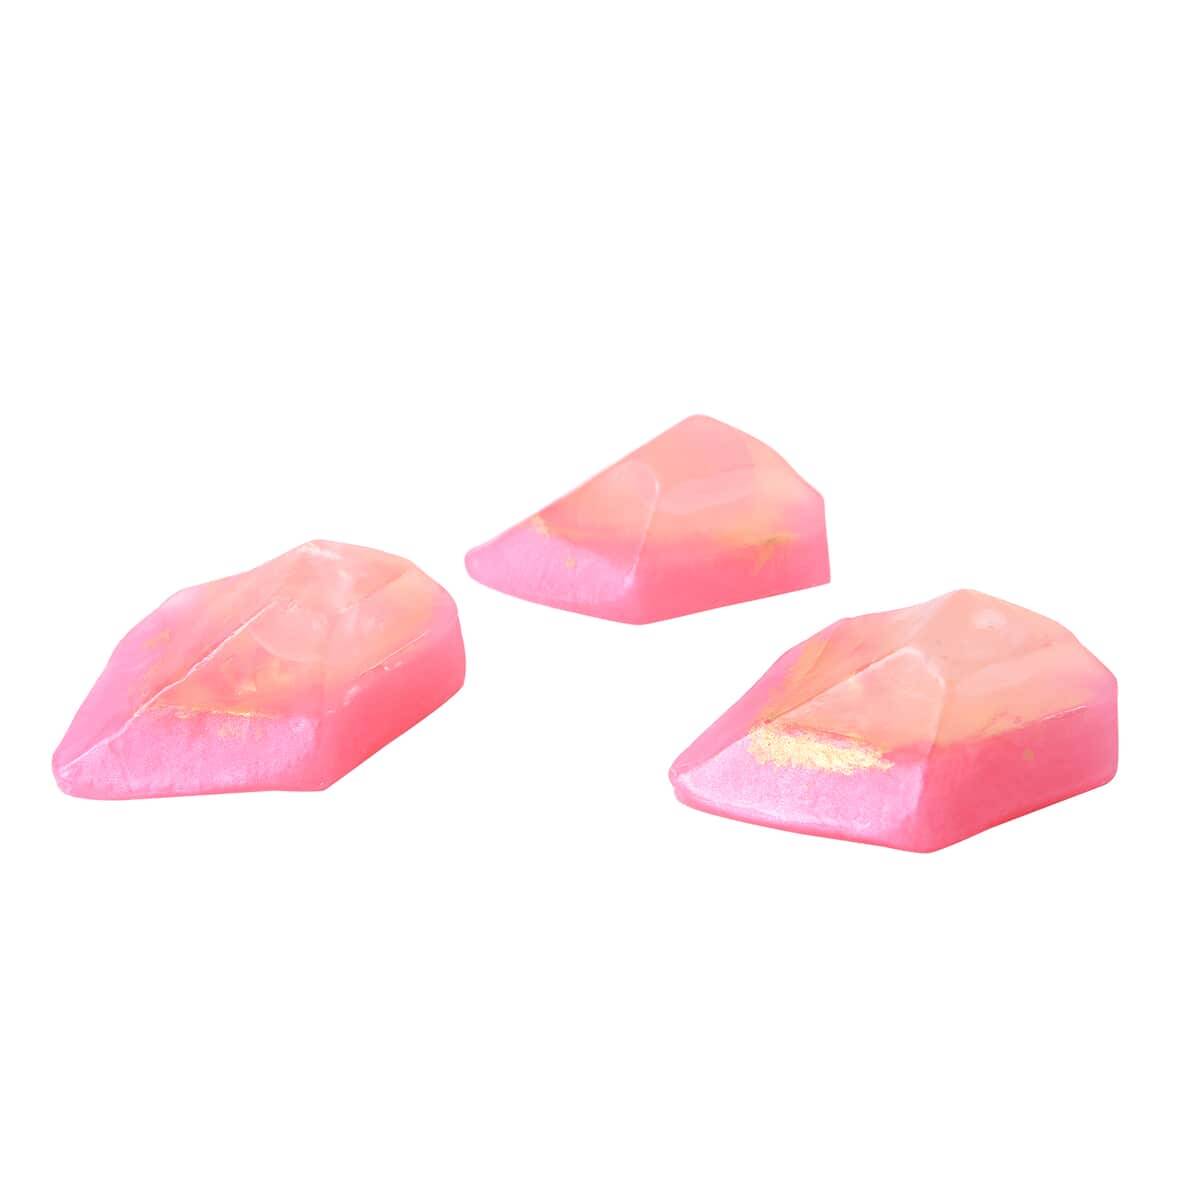 Marigold + Lotus 3pc Set Rose Quartz Soap Rock with Crystal Infused and Strawberry Fragrance image number 5